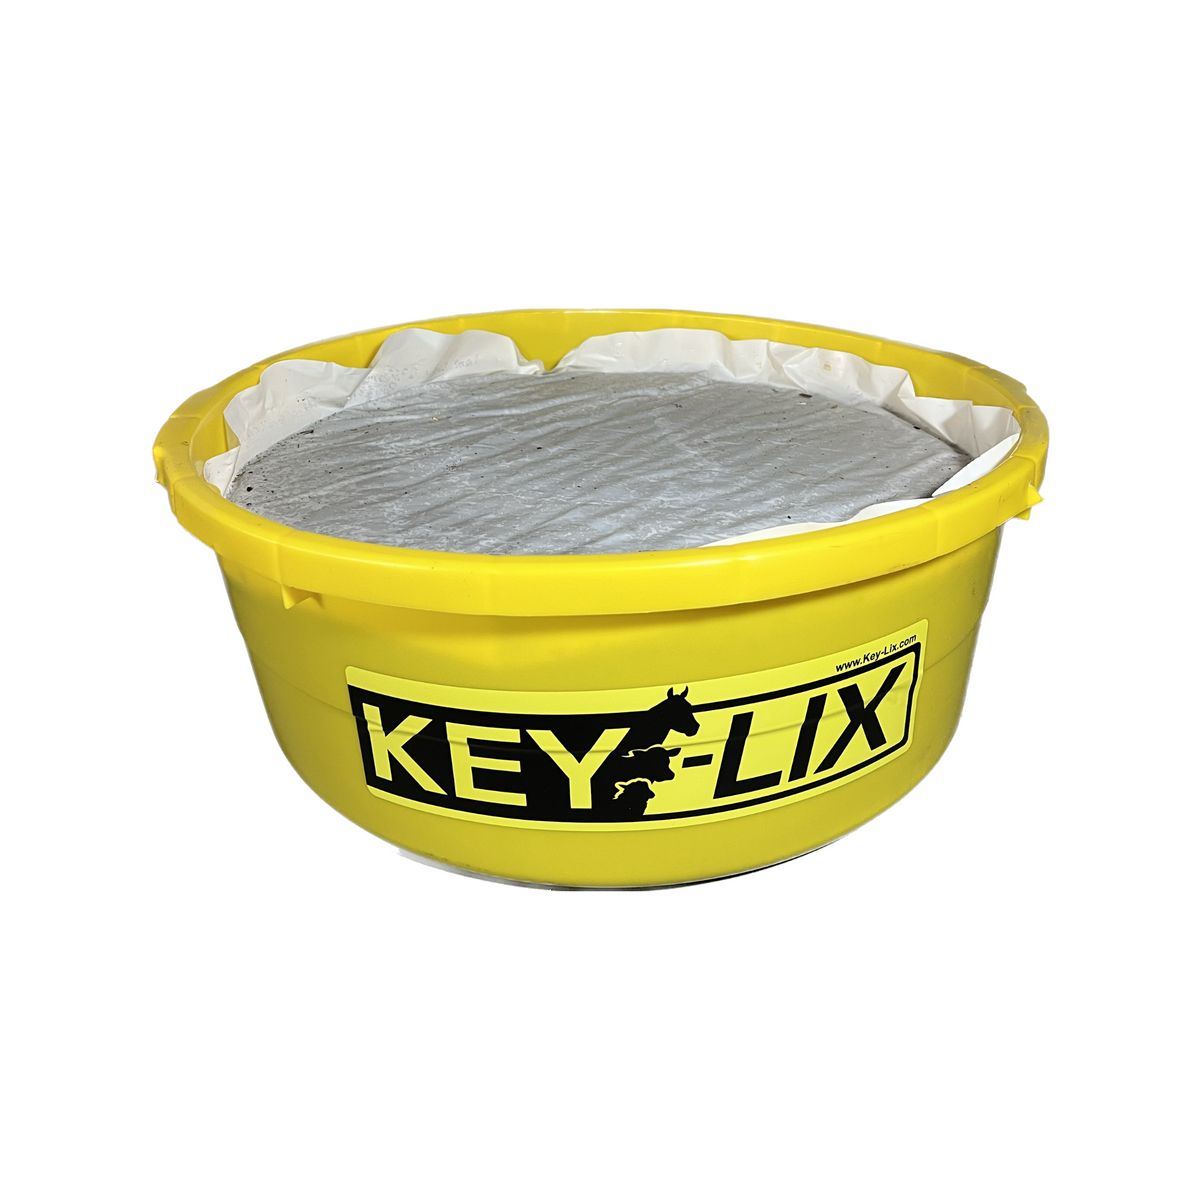 Keylix Equine Gold Tub for Horses